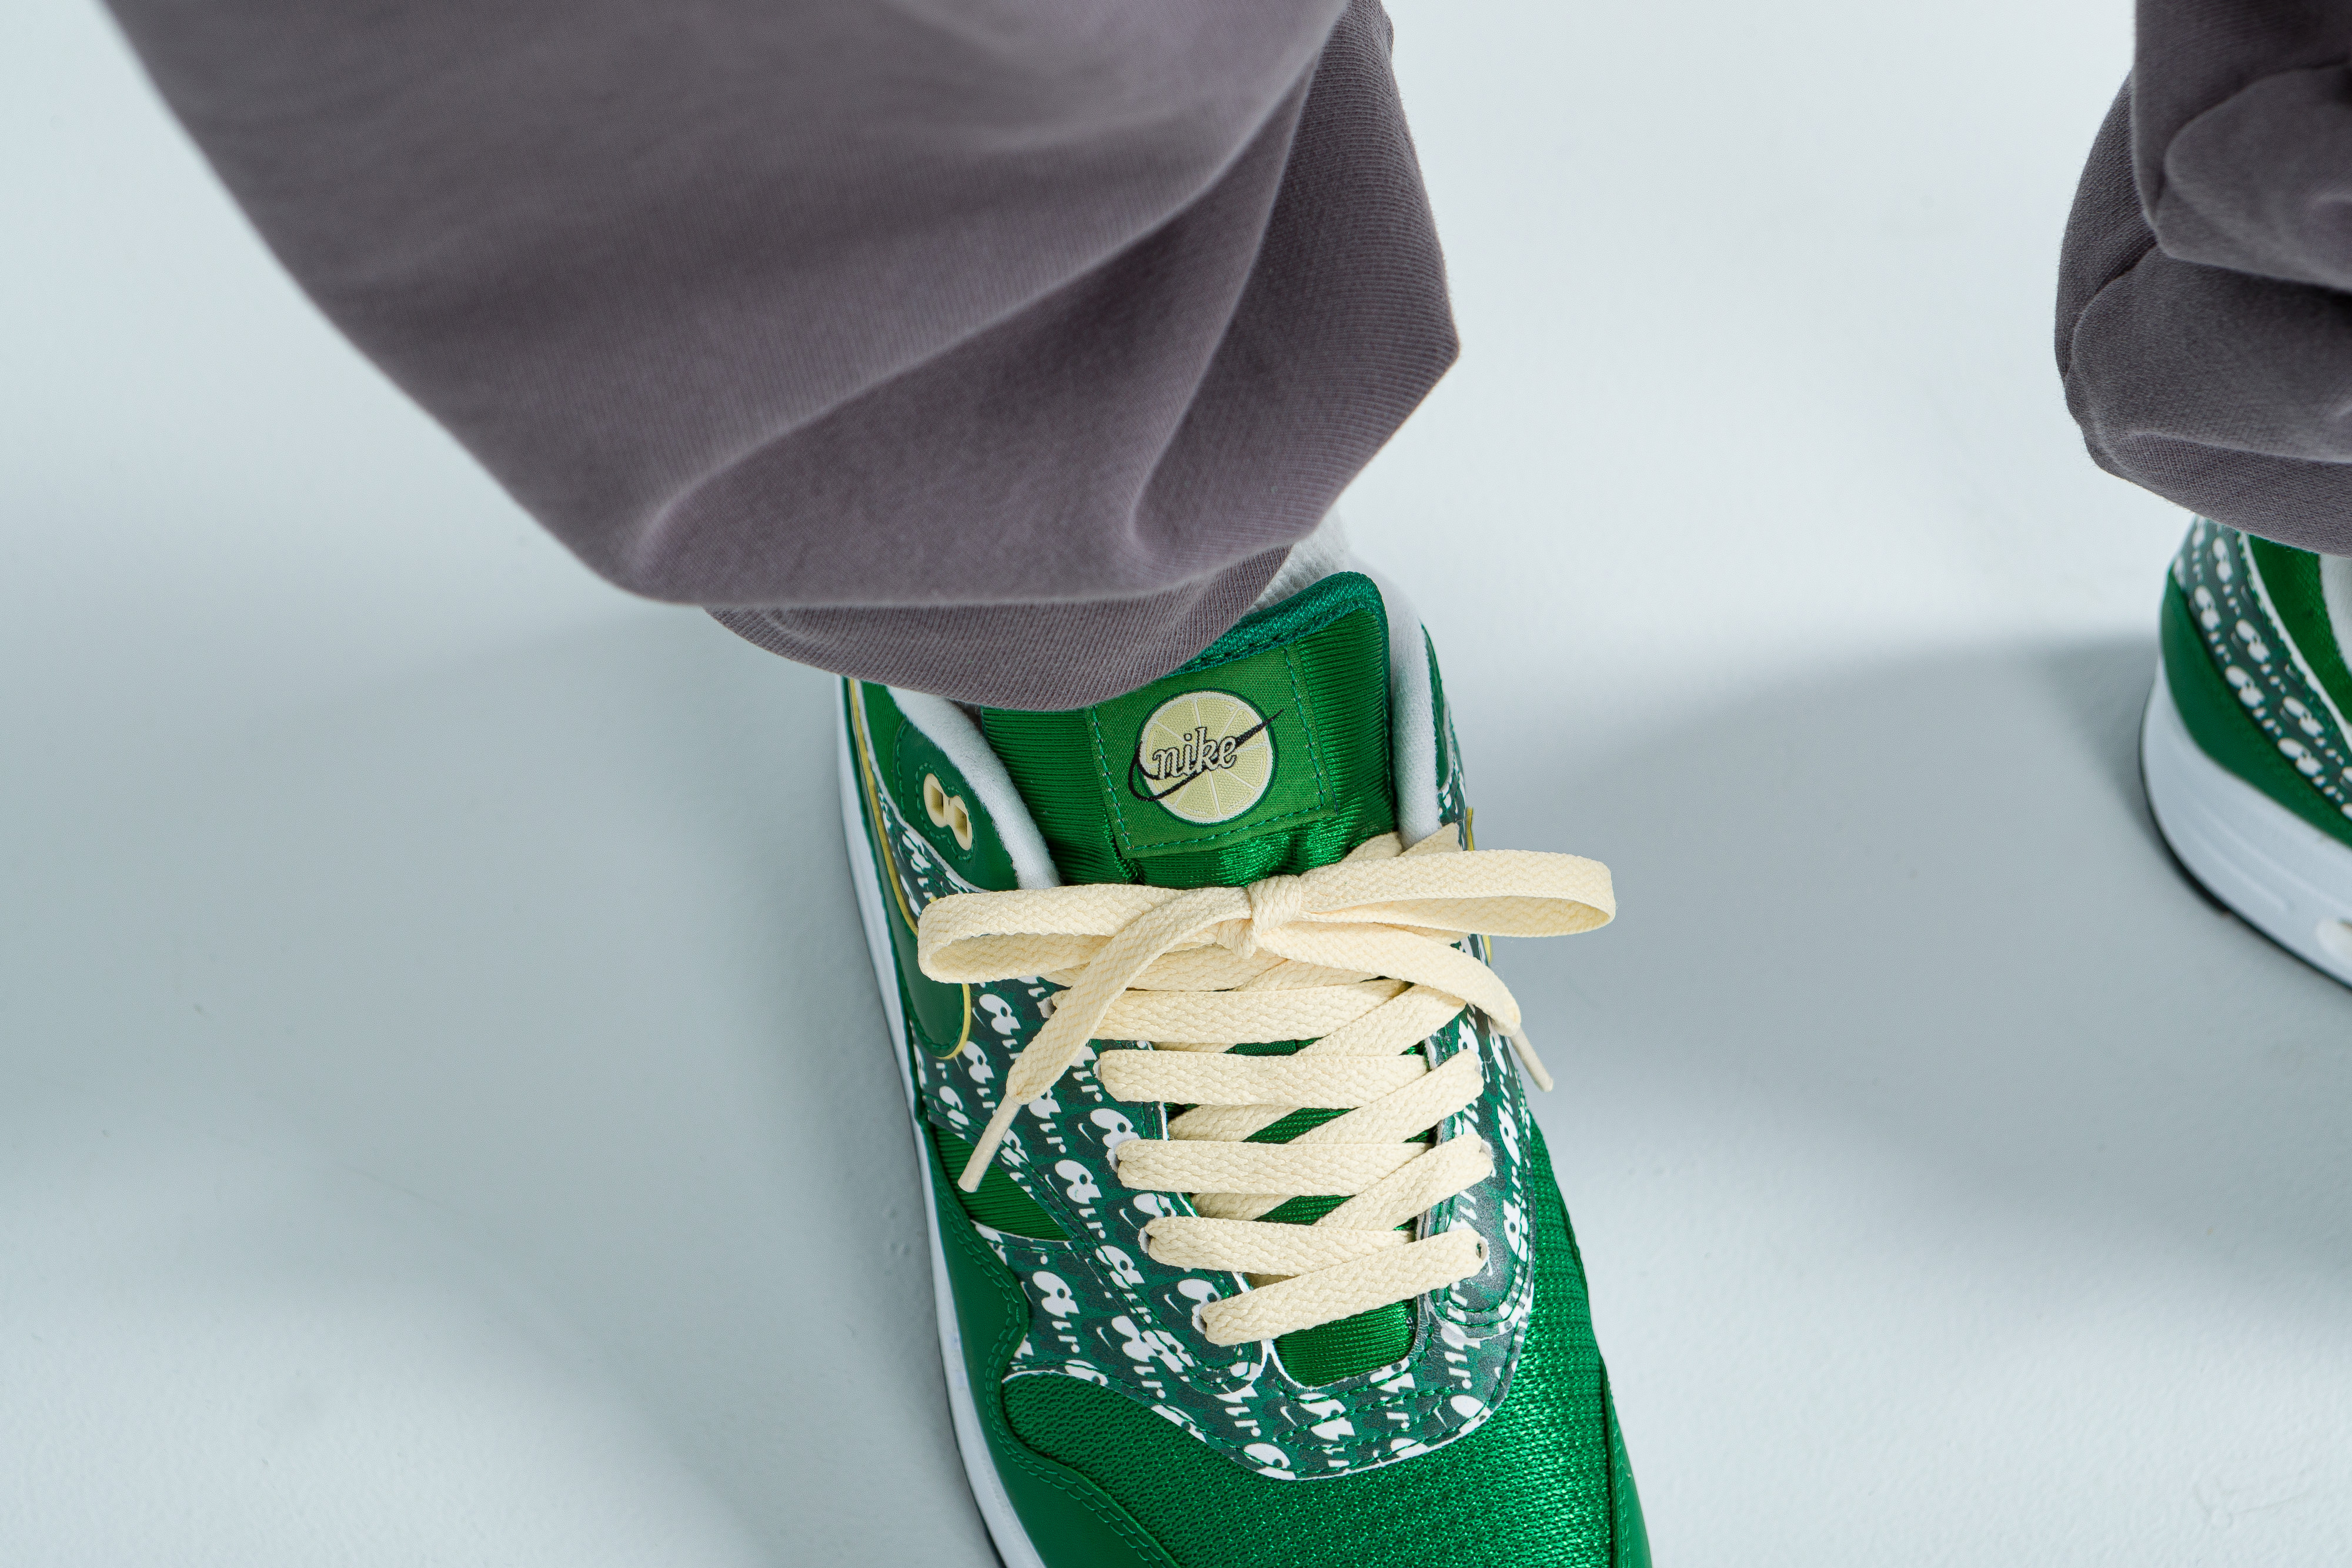 Up There Launches - Nike
Air Max 1 Premium - Pine Green/Pine Green-True White